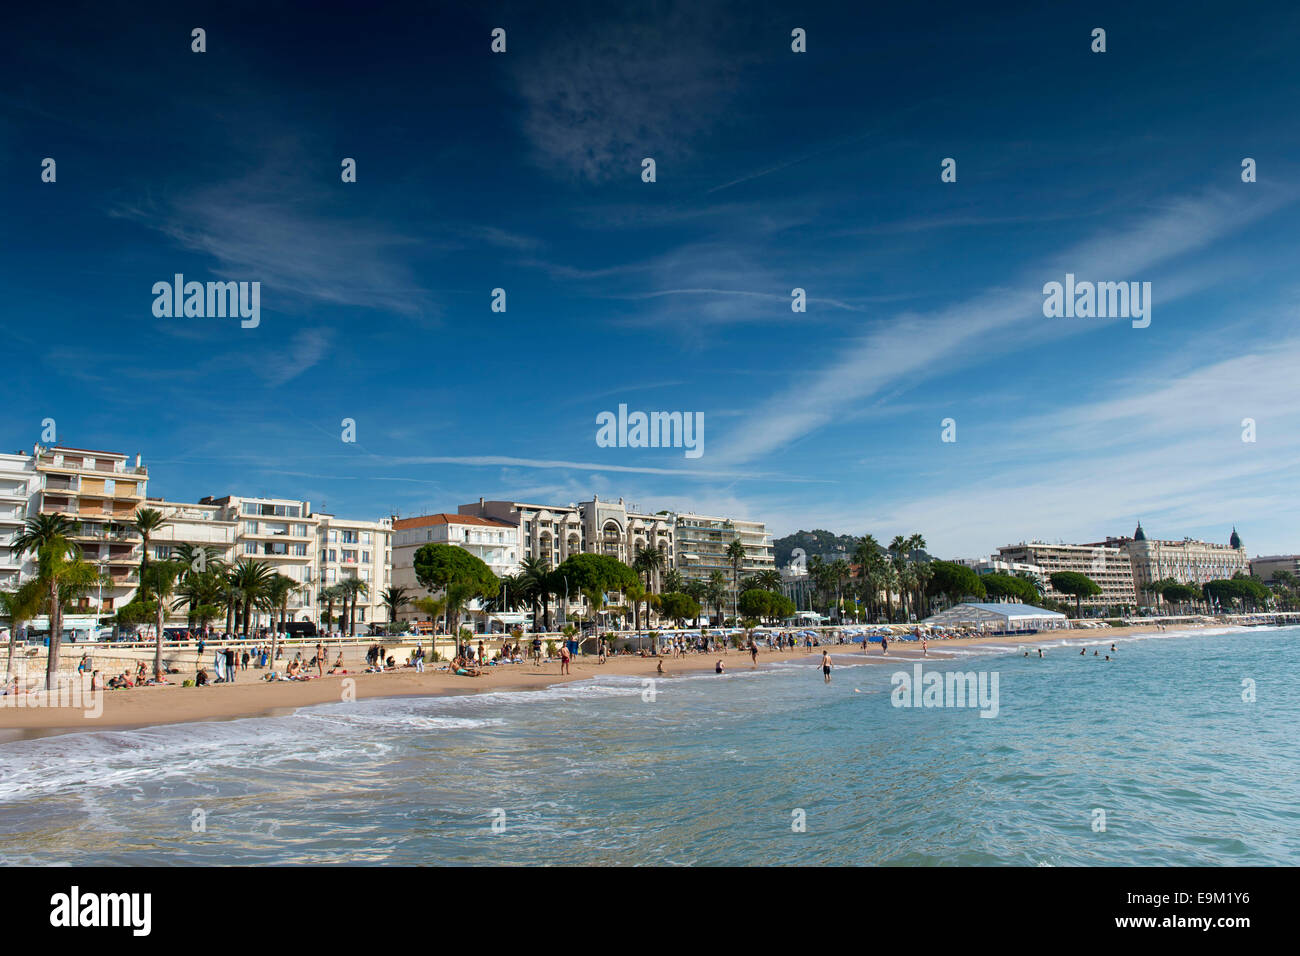 General view of the beach at Cote D Azur in Cannes, South of France, off the La Croisette road. Stock Photo